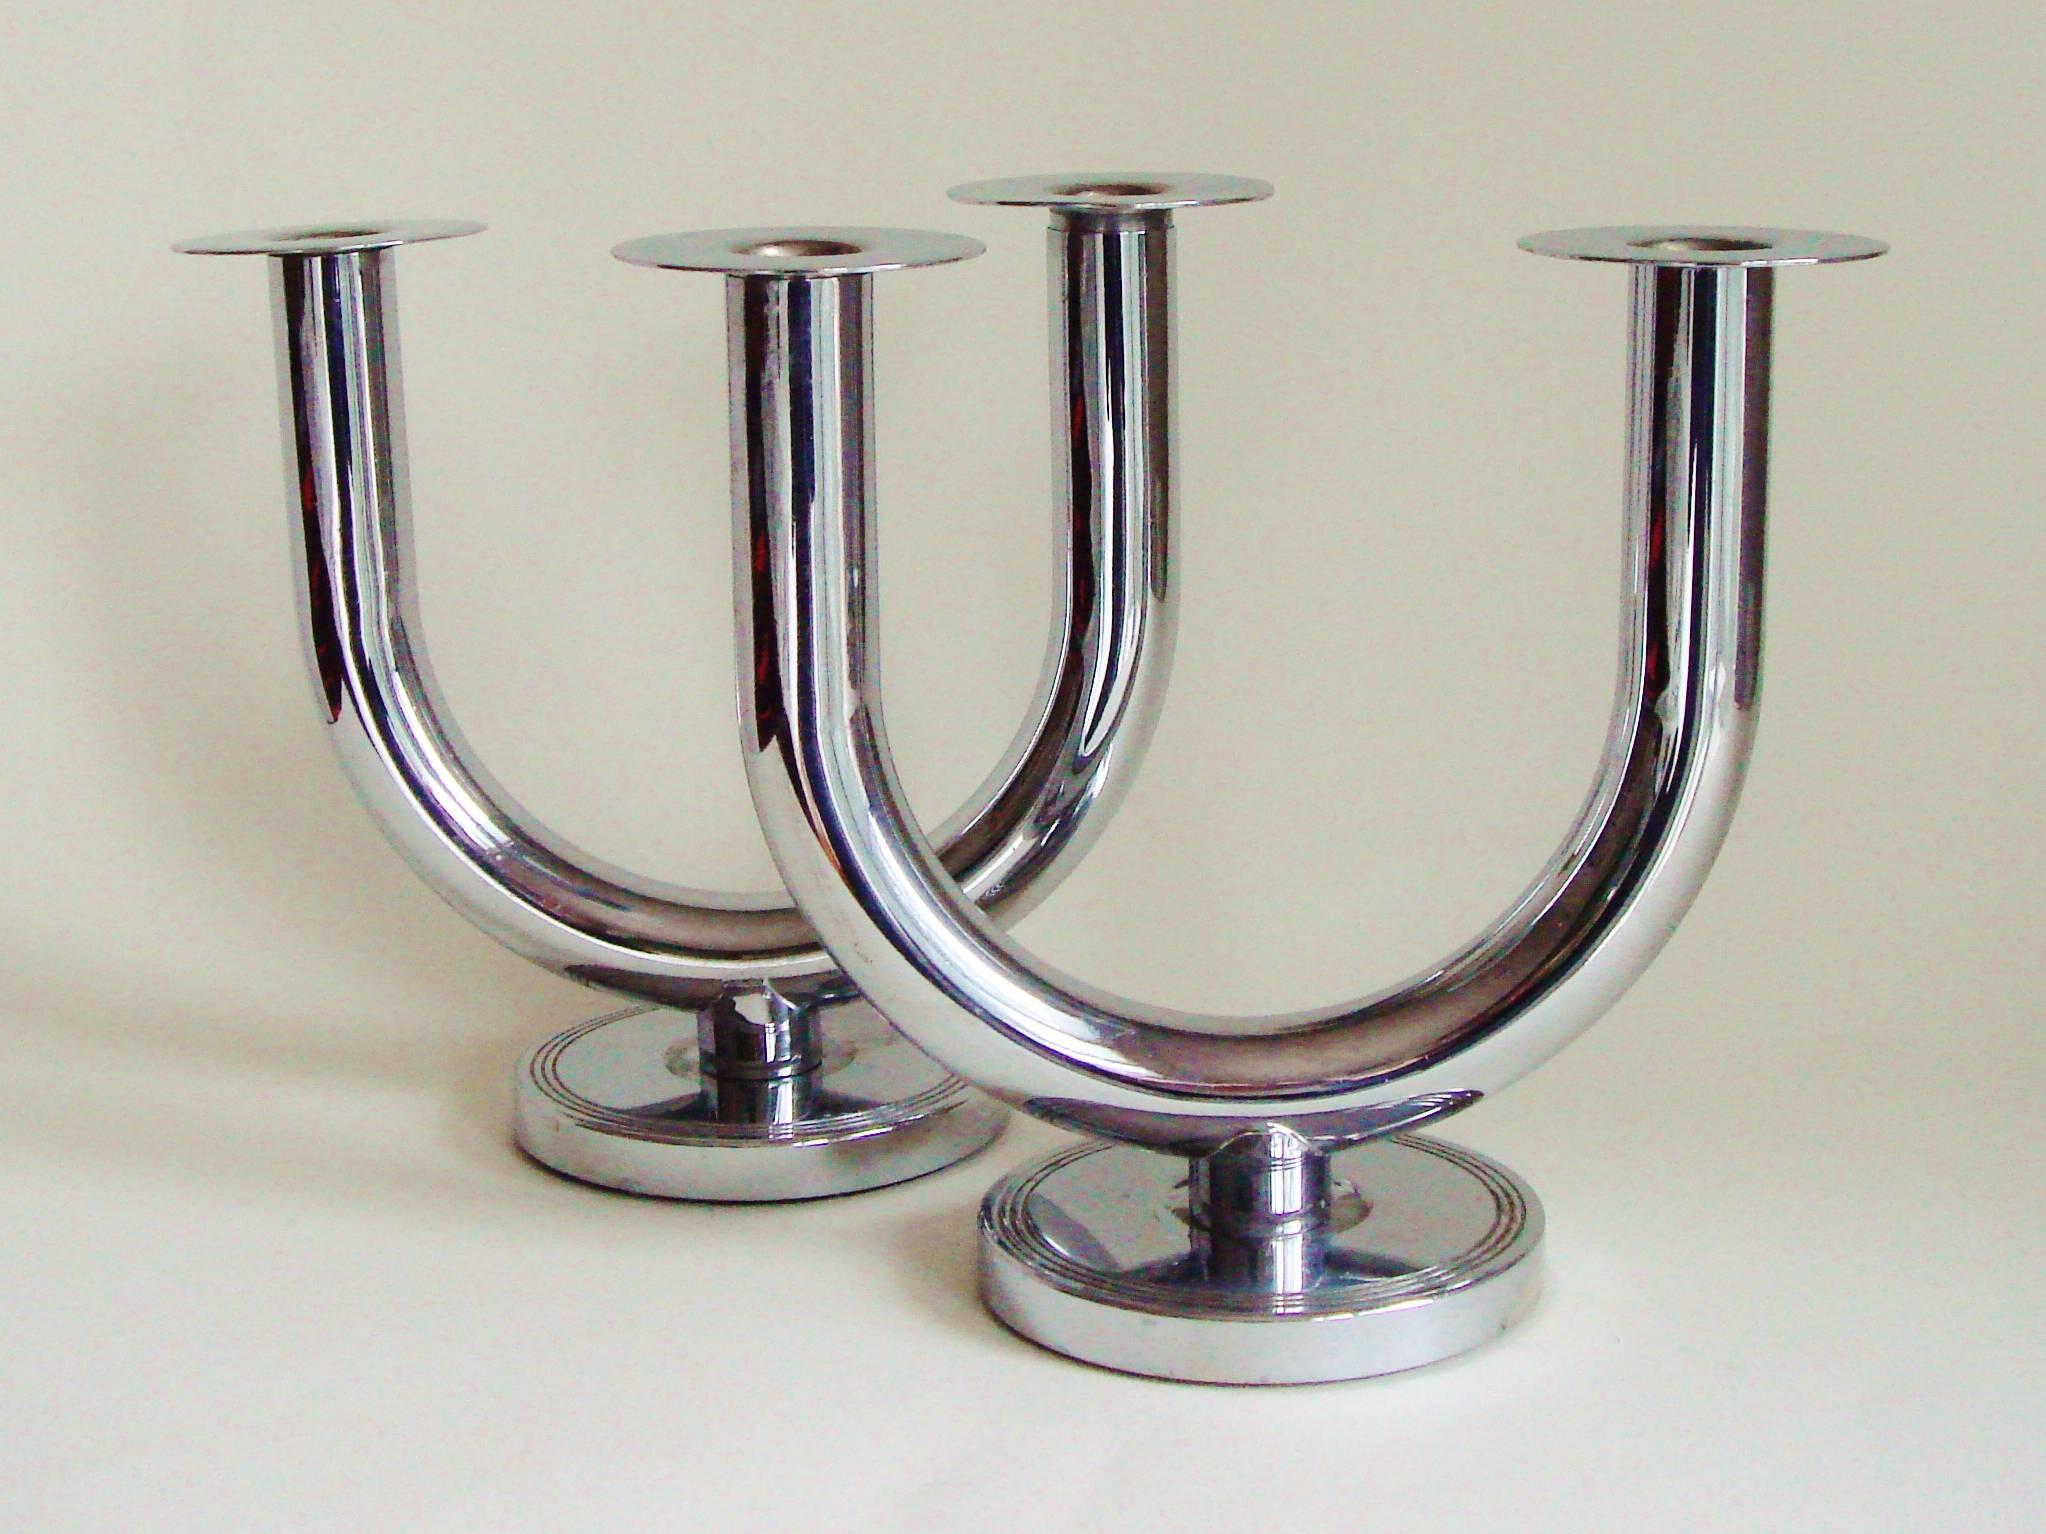 This set of four American Art Deco Taurex twin candlesticks were designed in 1933 by Walter Von Nessen for the Chase Brass and Copper Company of Connecticut. This group has examples of both the even model and the uneven model. They are designed to